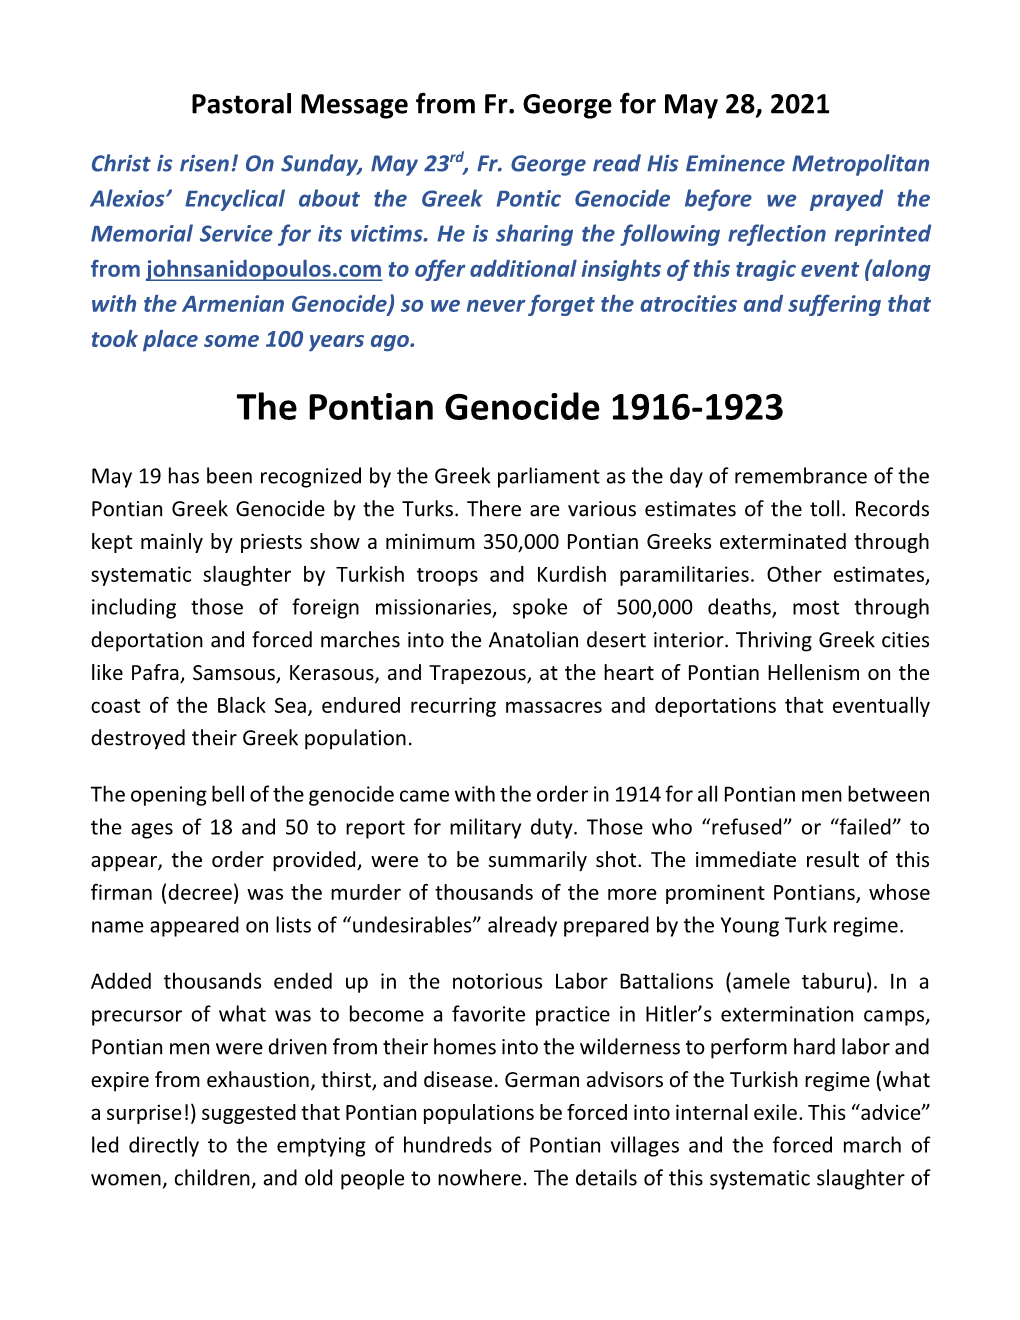 The Pontian Genocide 1916-1923